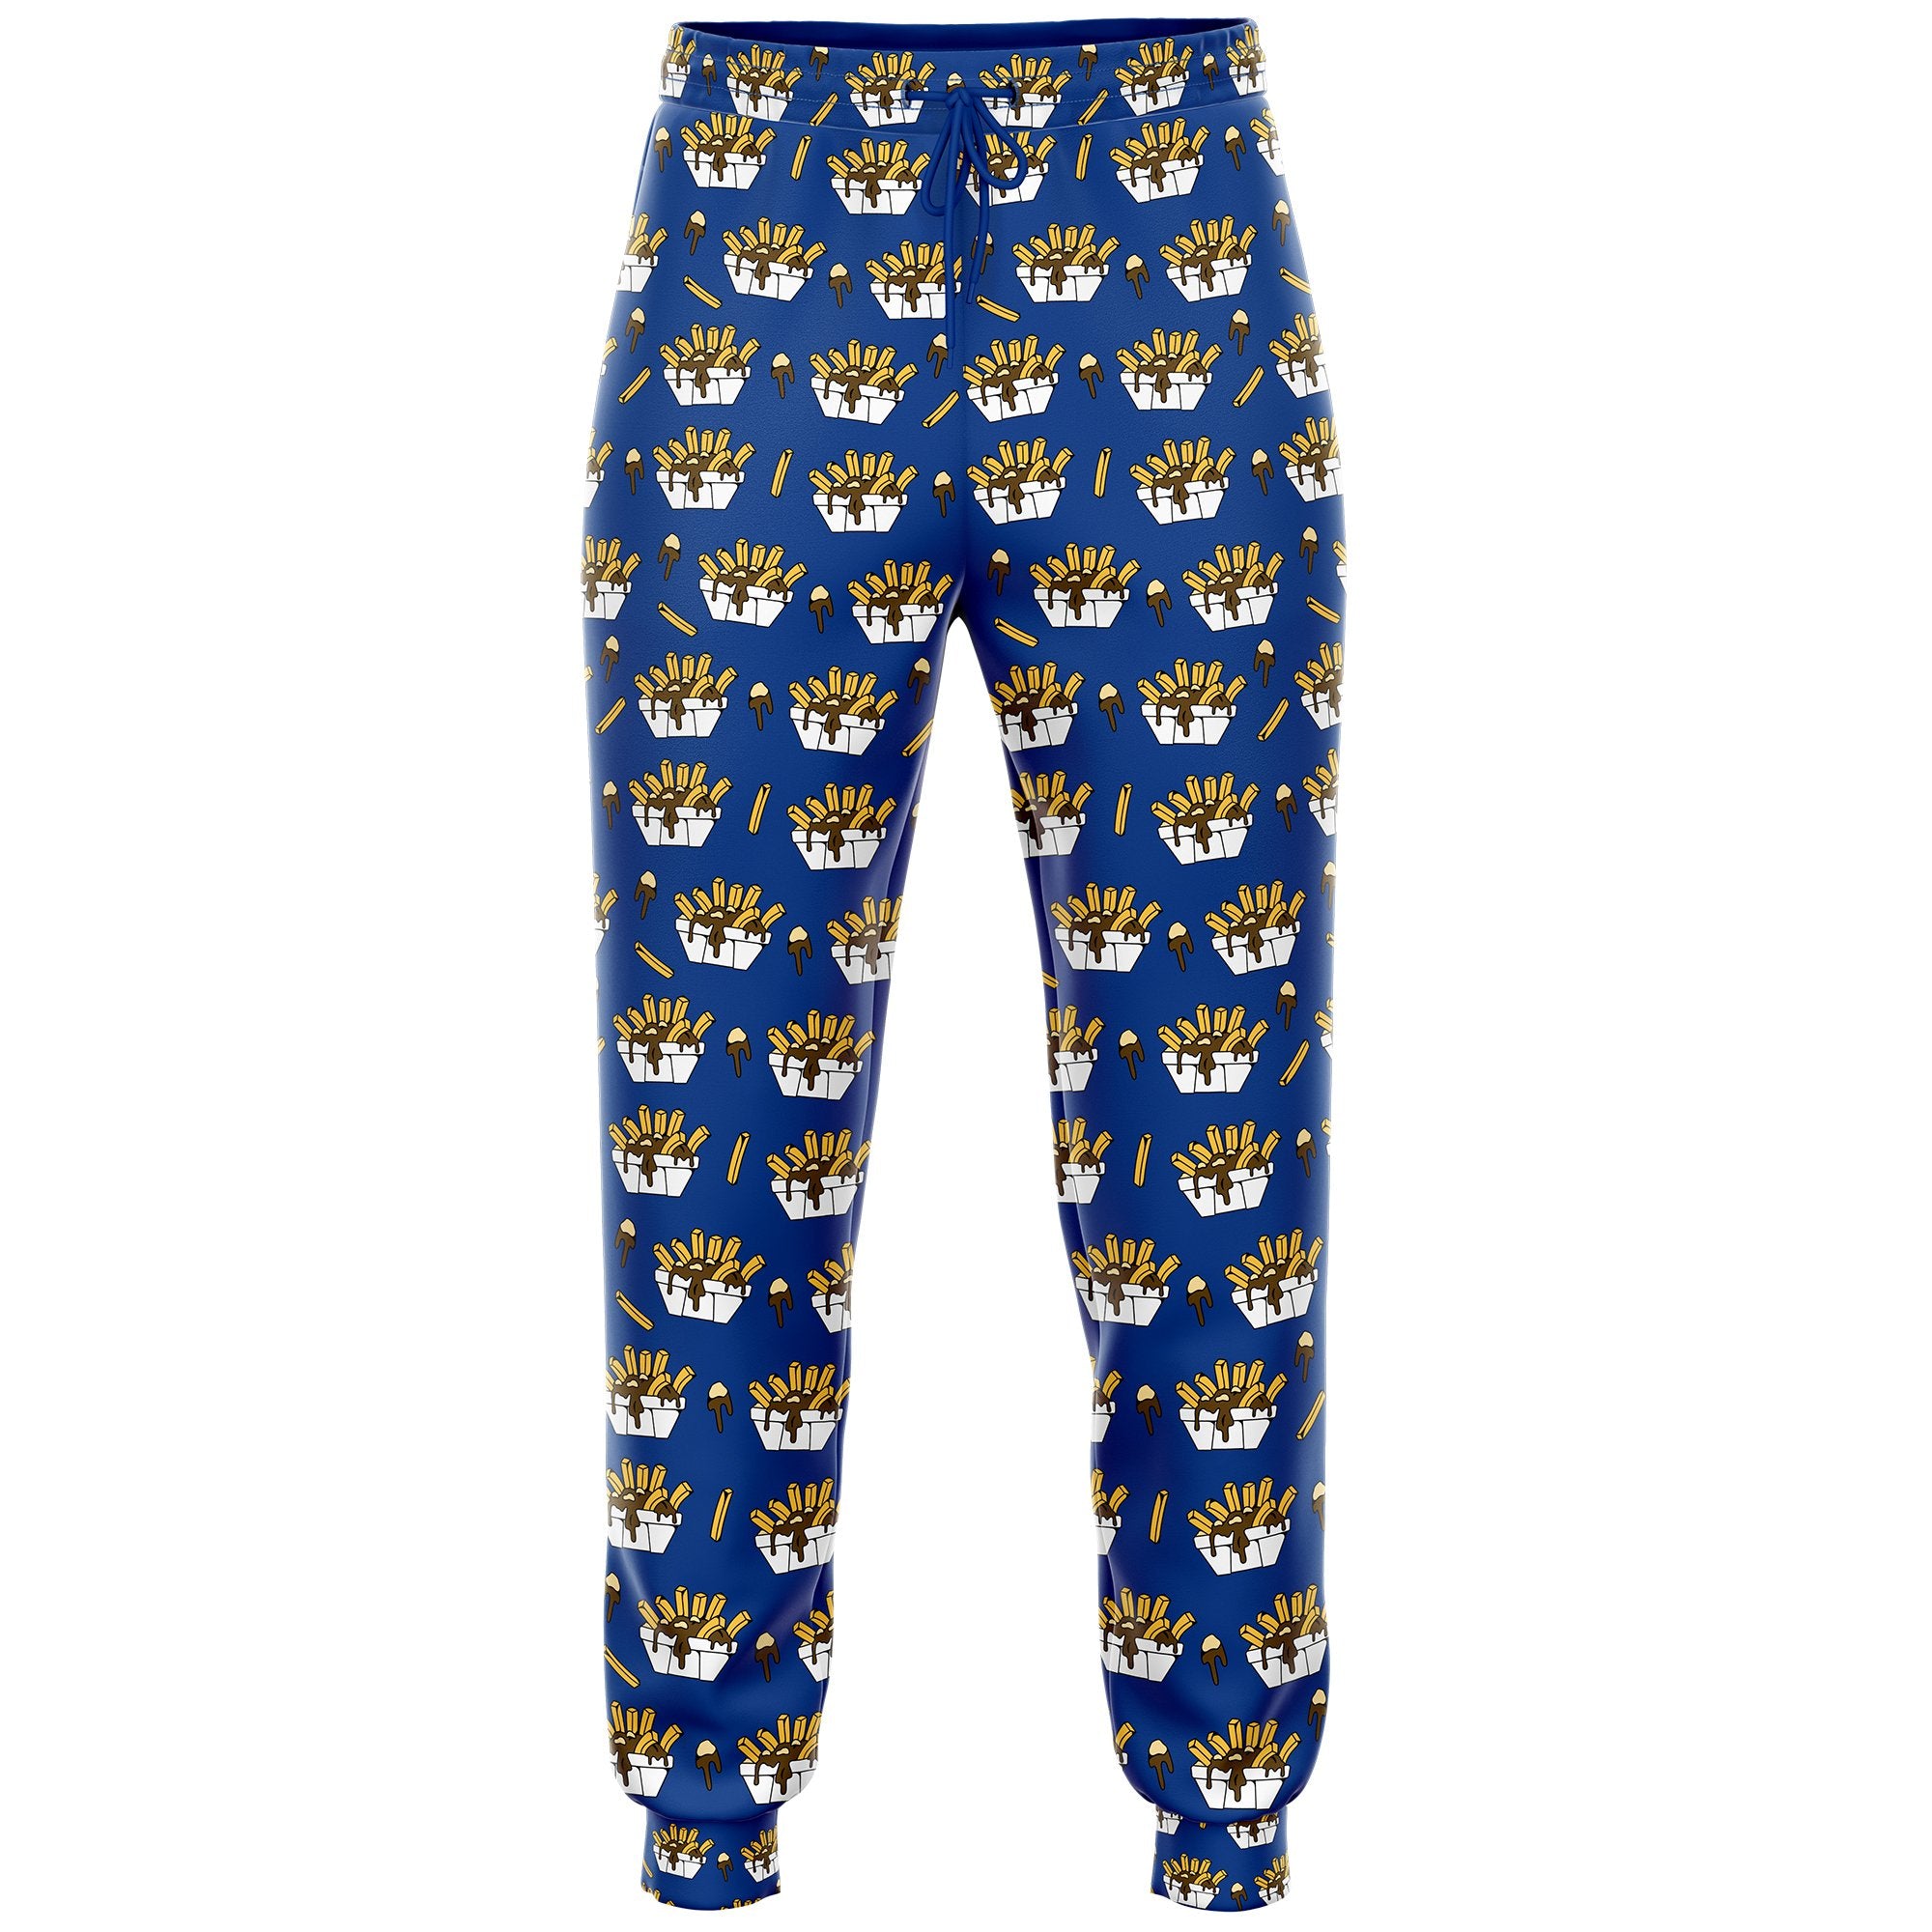 Crowns Pajama Pants for Women Sleep Shorts with Pockets Boxers